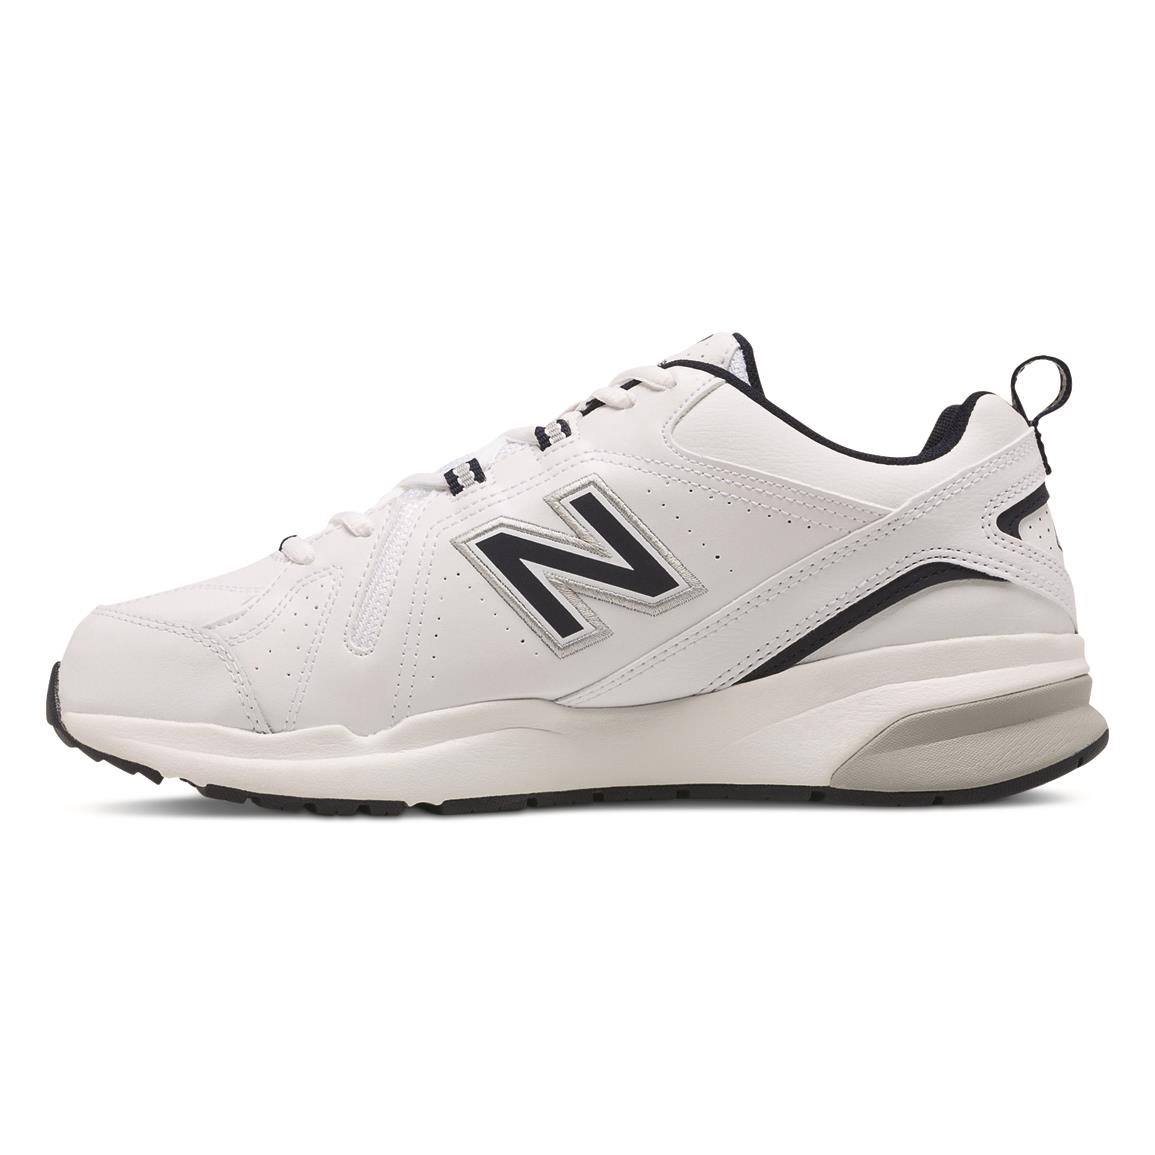 New Balance Men's 608v5 Athletic Shoes - 719791, Running Shoes ...